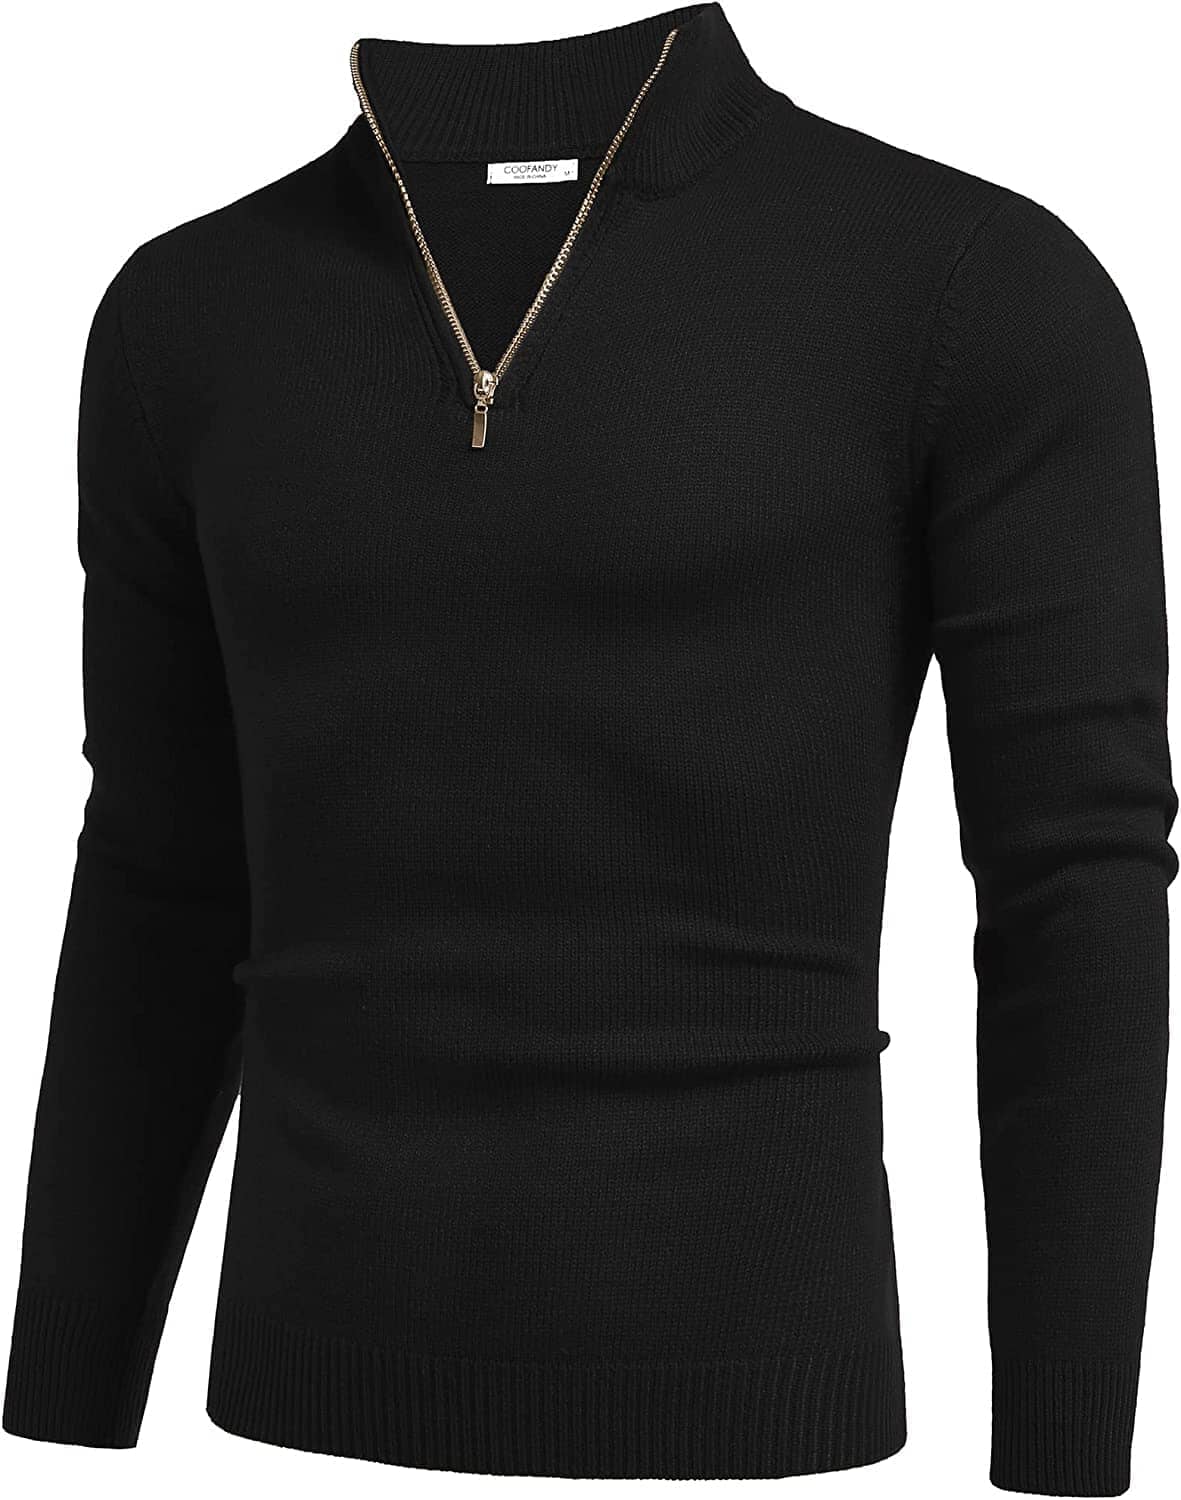 Coofandy Striped Zip Up Mock Neck Pullover Sweaters (US Only) Fashion Hoodies & Sweatshirts Simbama Type Black S 